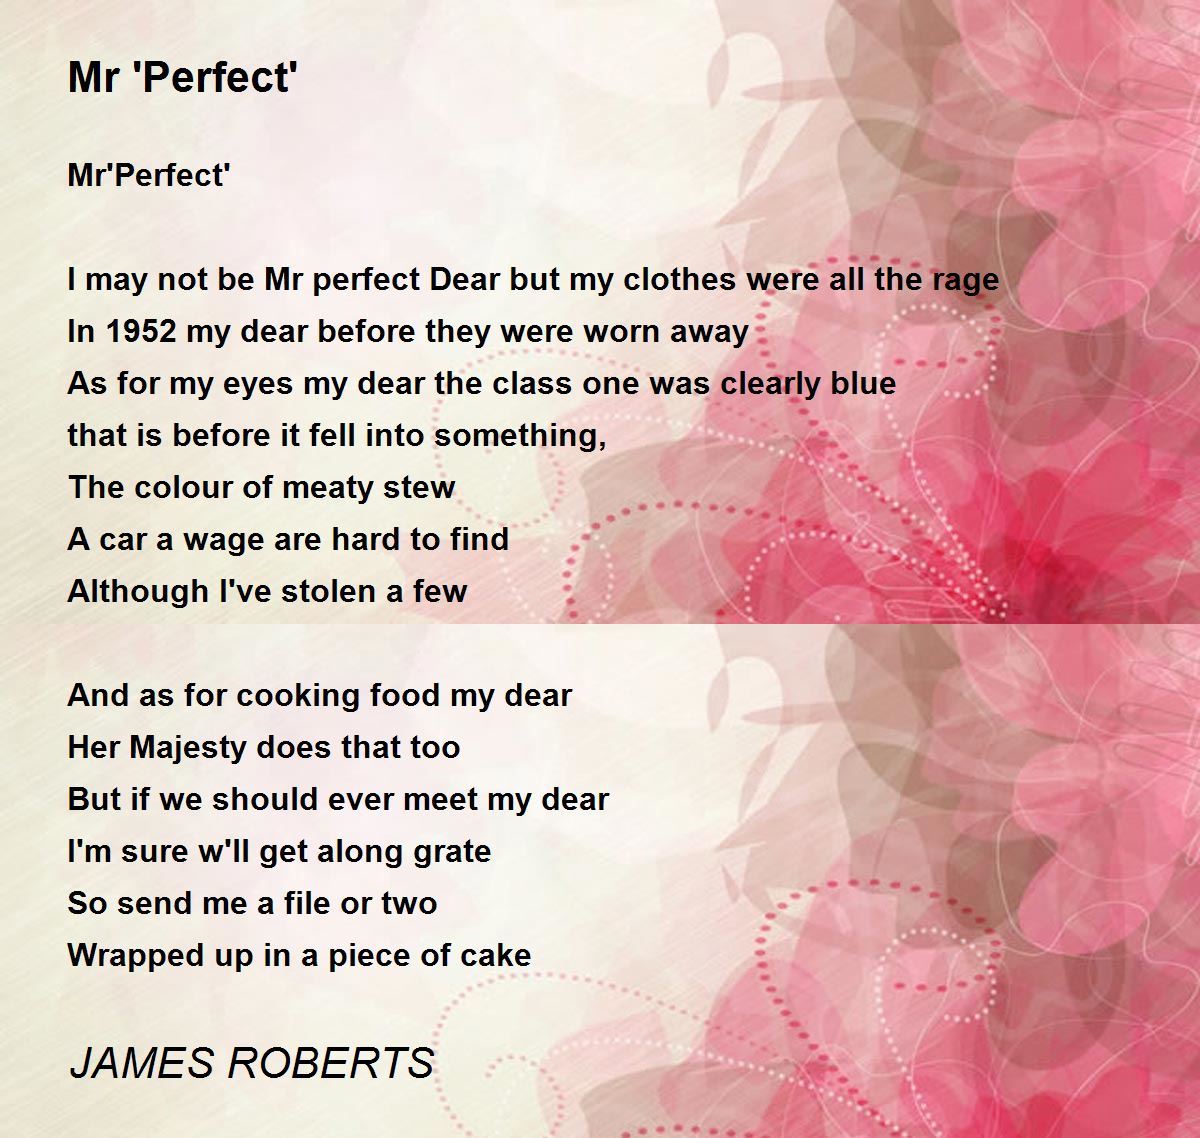 Mr 'Perfect' Download. perfect poems. 